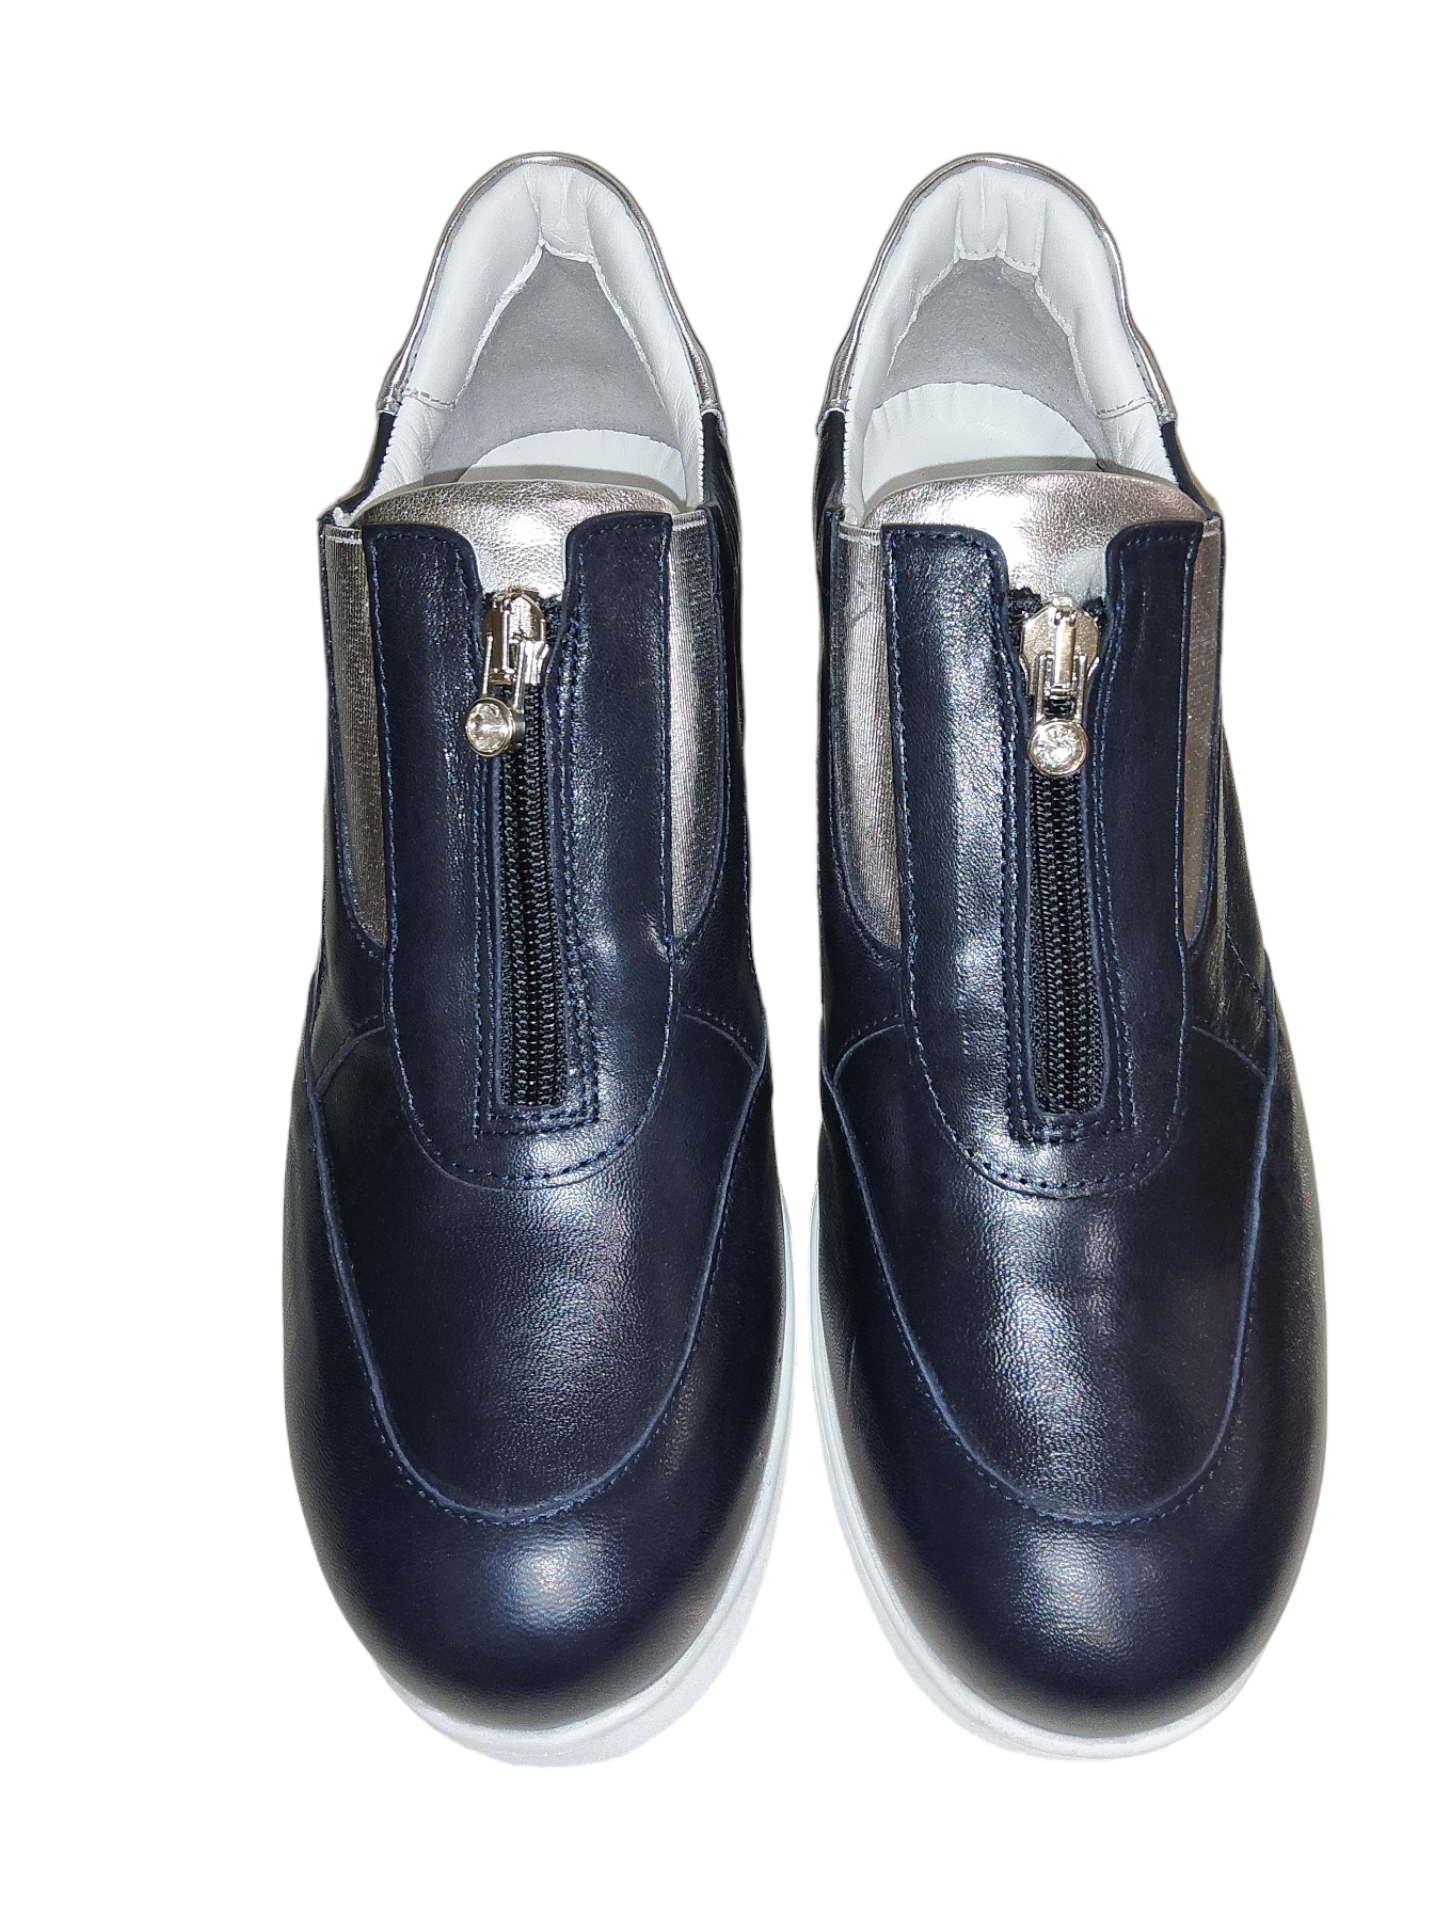 Navy leather wedge shoe